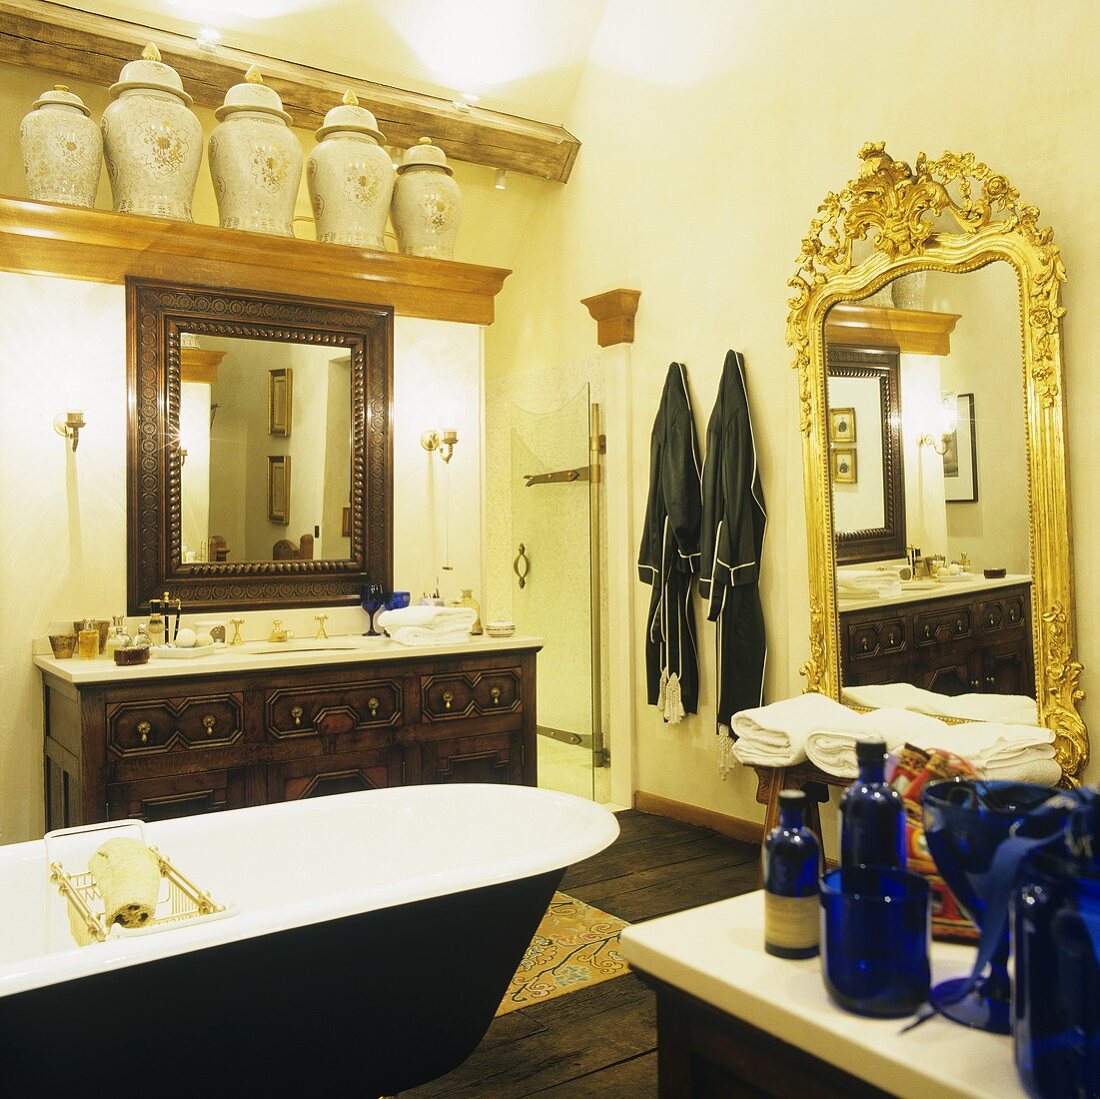 A bathroom in a country house with a free standing bathtub in front of a wash basin with a wooden cupboard and a wall mirror with a golden frame